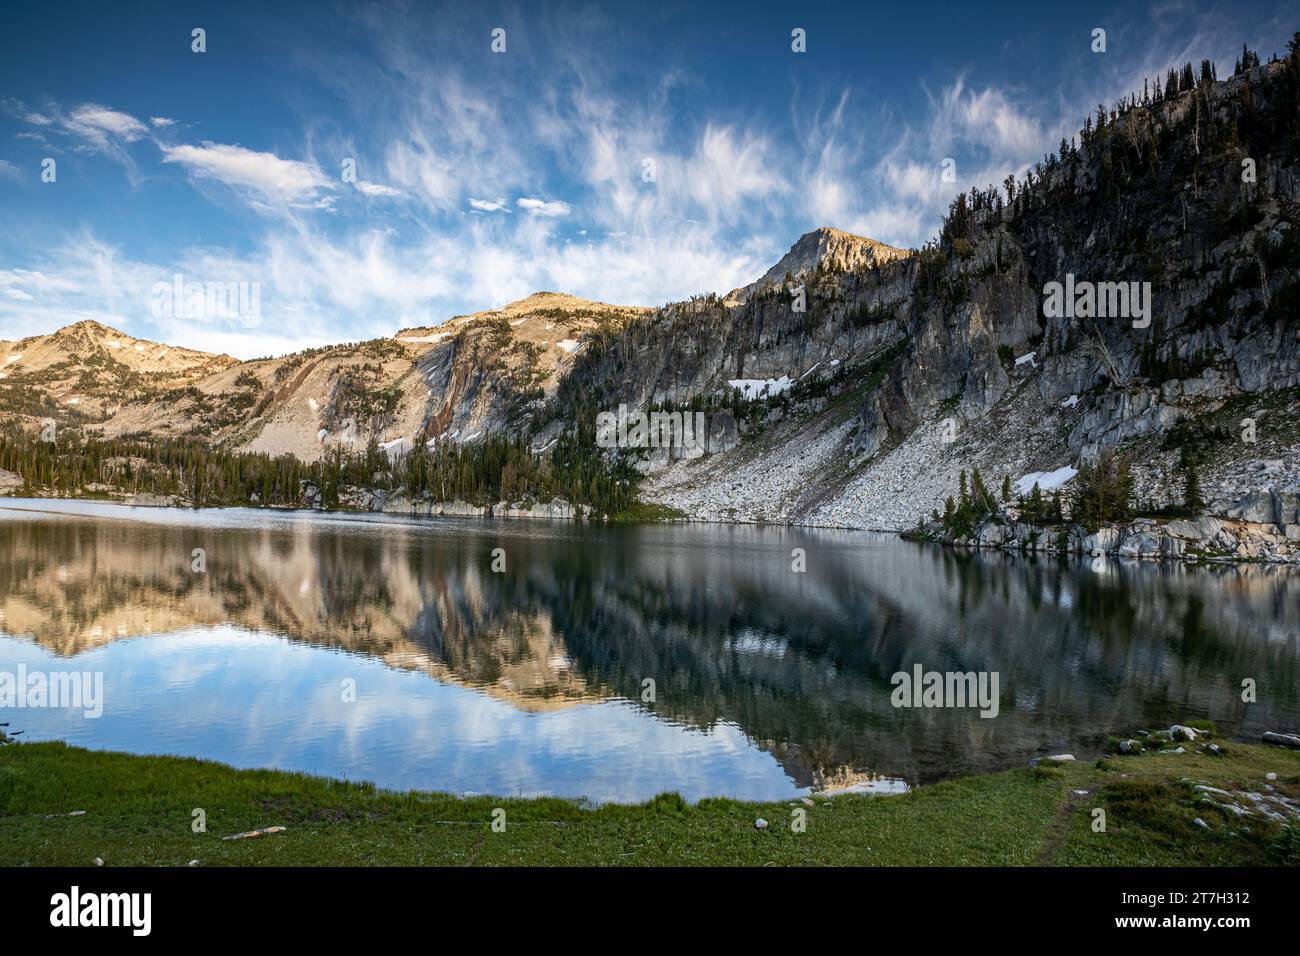 OR02727-00...OREGON - Clouds over Eagle Cap reflecting in the late afternoon in Mirror Lake; Eagle Cap Wilderness area. Stock Photo